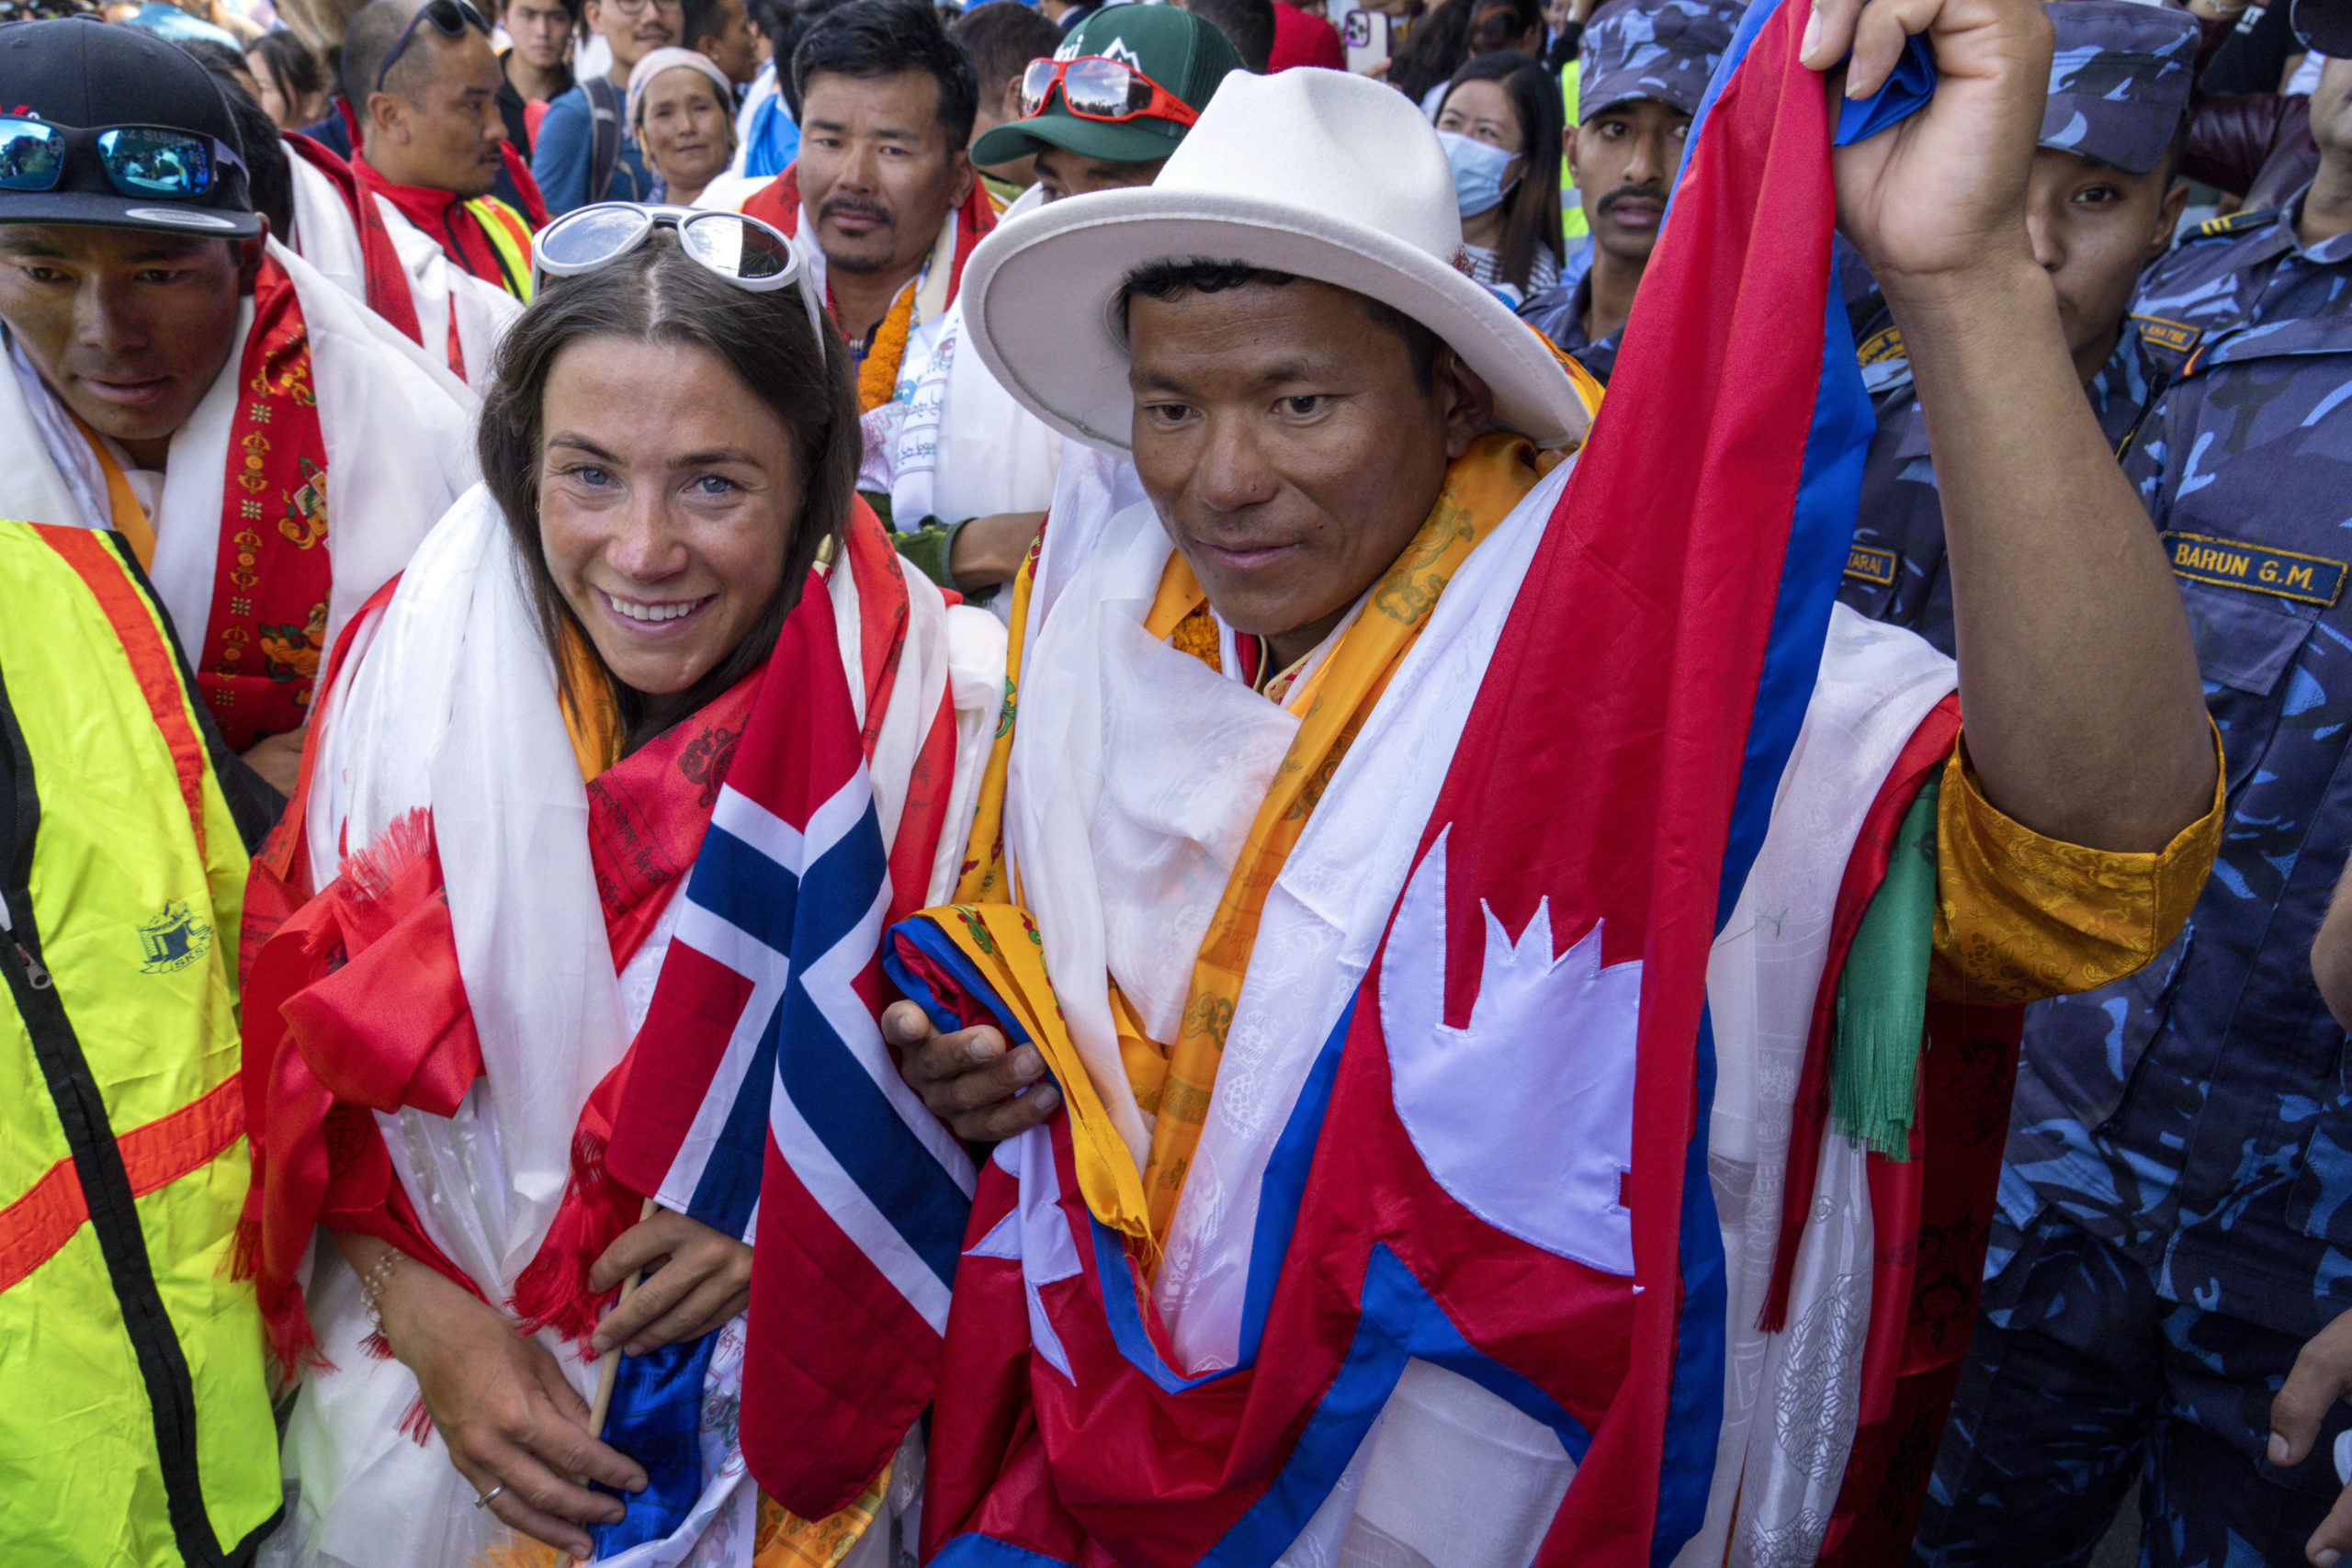 Norwegian climber Kristin Harila, left, and her Nepali sherpa guide Tenjin Sherpa, right, who climbed the world’s 14 tallest mountains in record time, arrive in Kathmandu, Nepal, on Aug. 5.